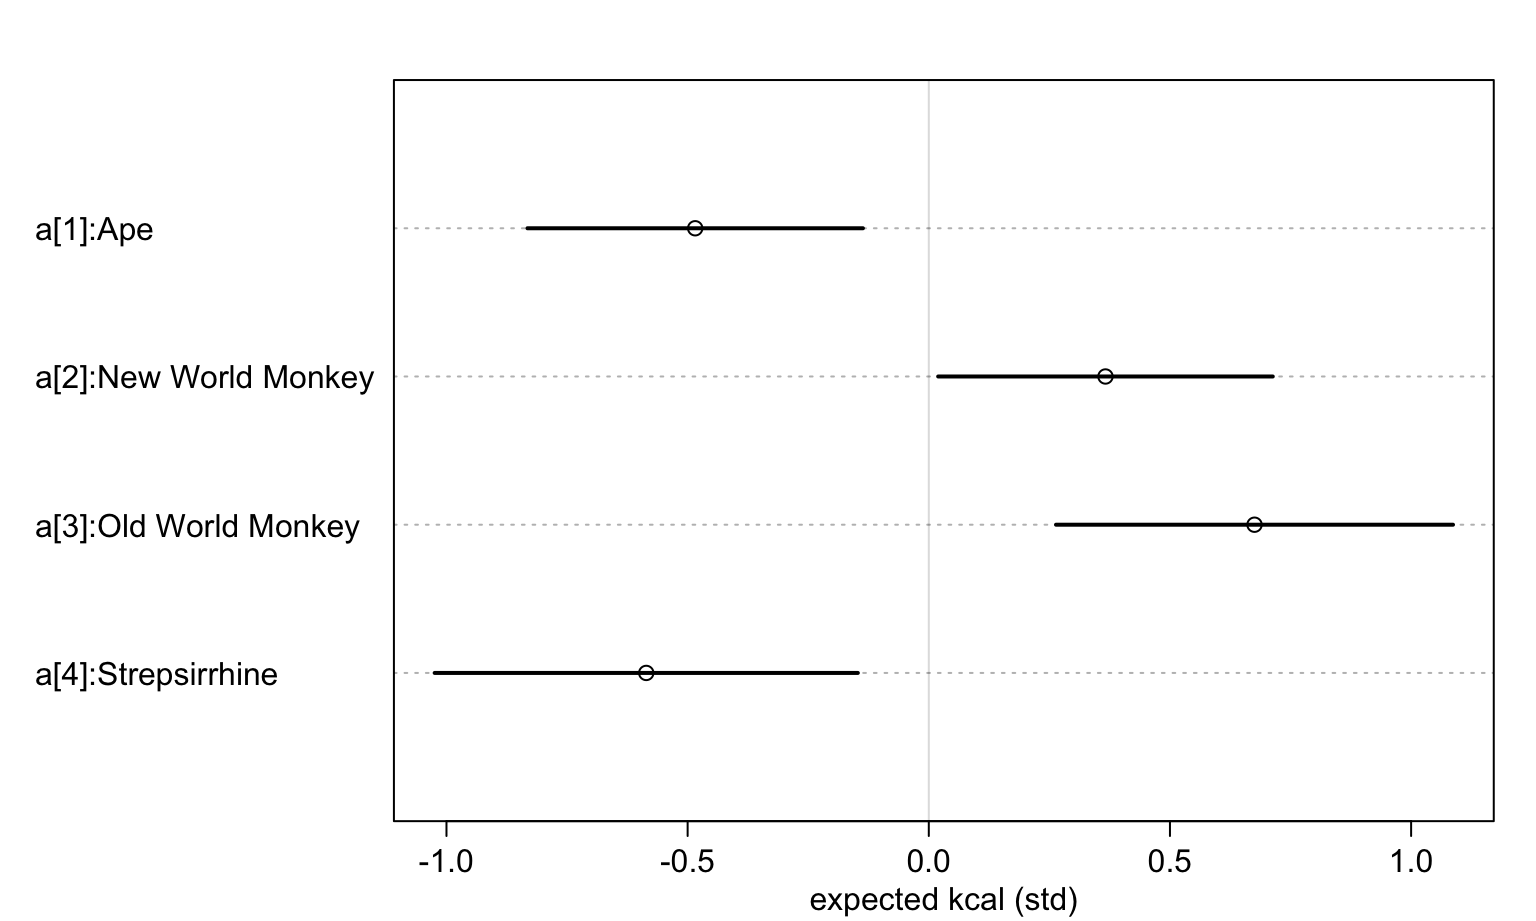 Posterior distributions of the milk energy density from four different species of primate.